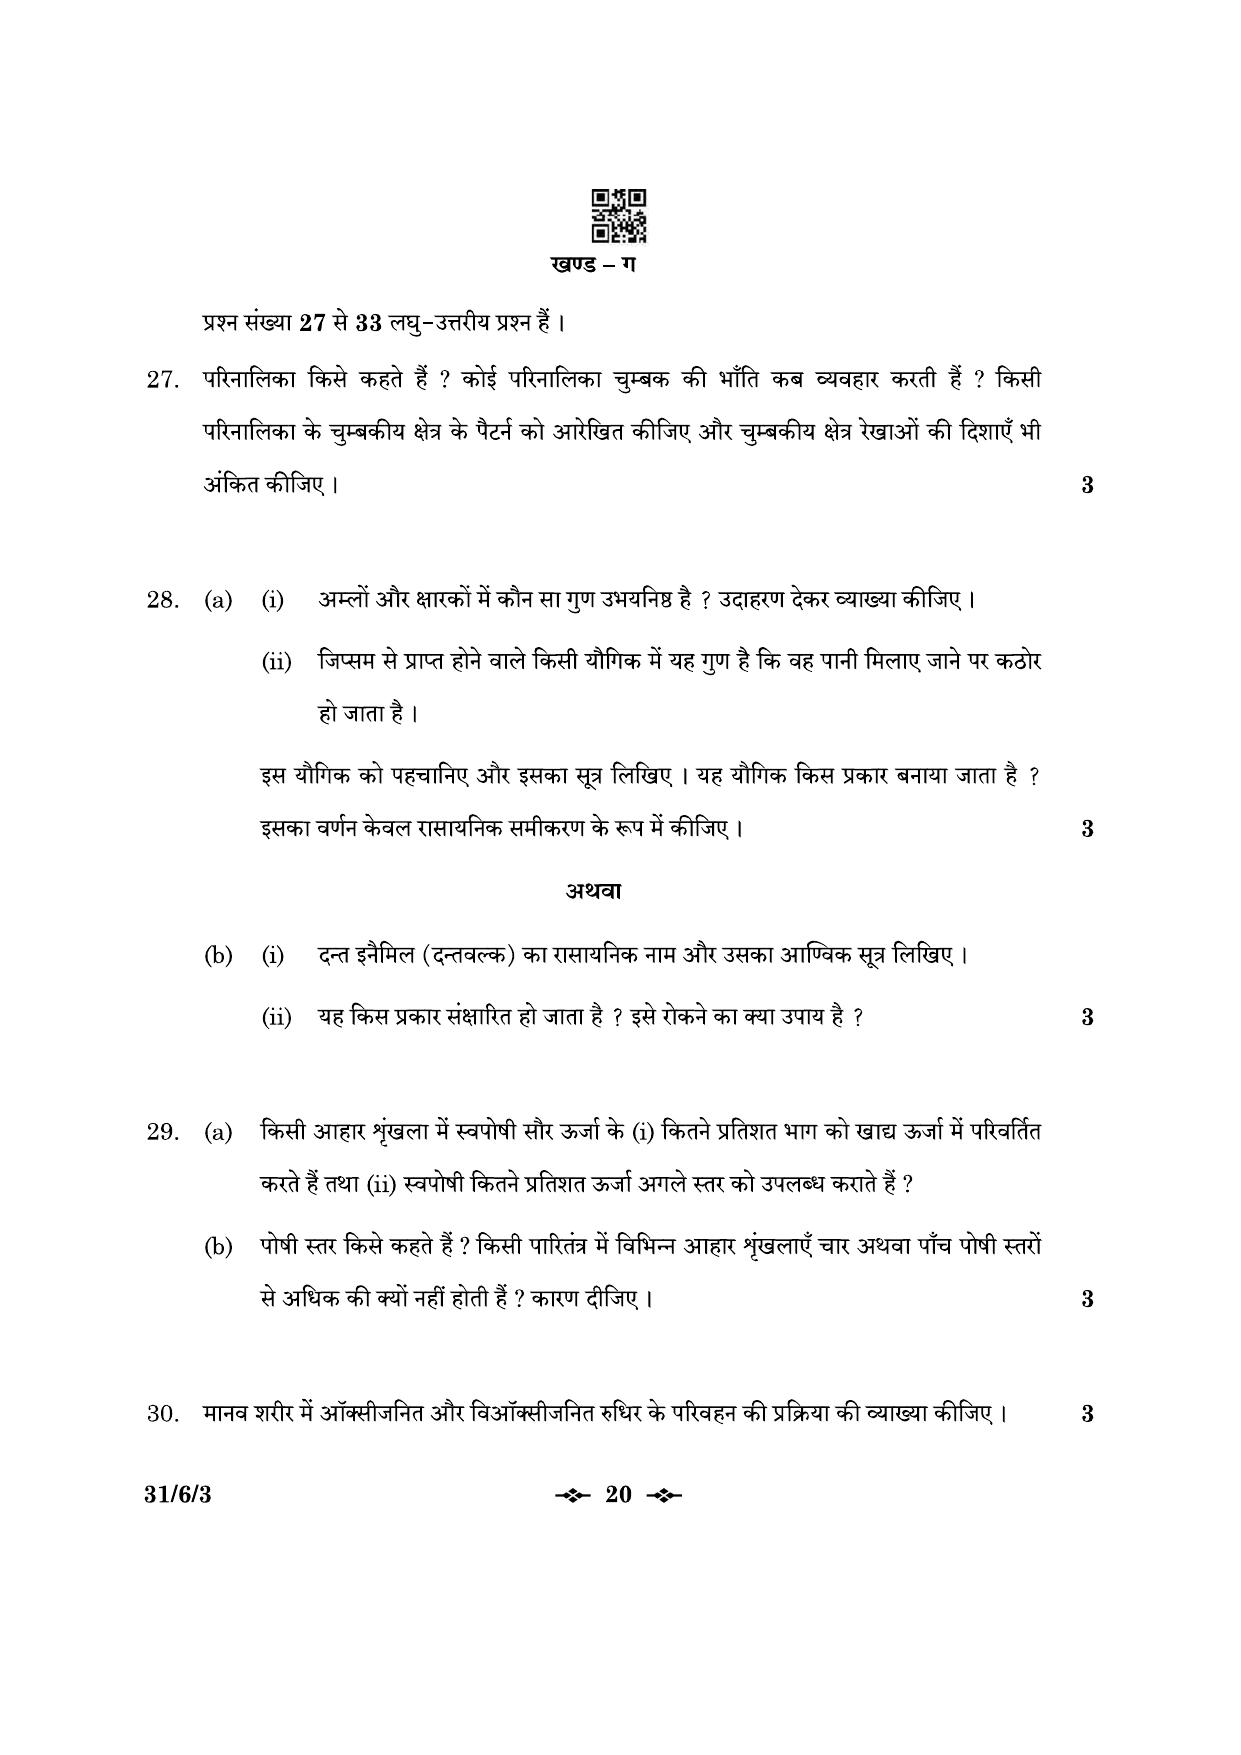 CBSE Class 10 31-6-3 Science 2023 Question Paper - Page 20